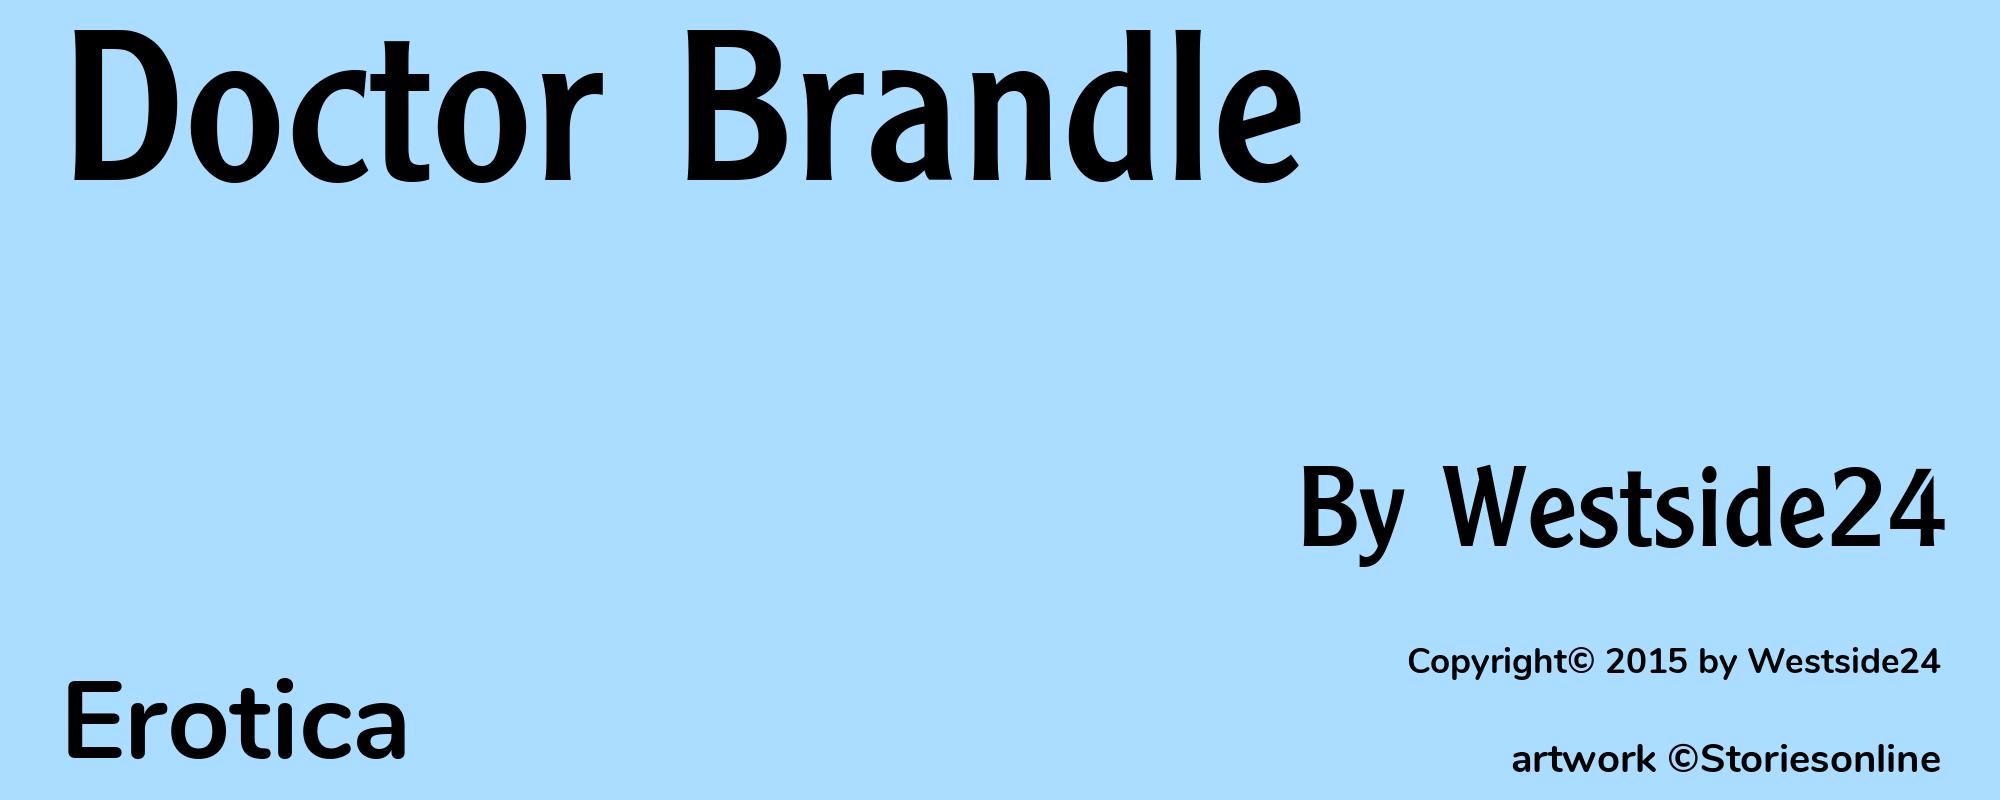 Doctor Brandle - Cover